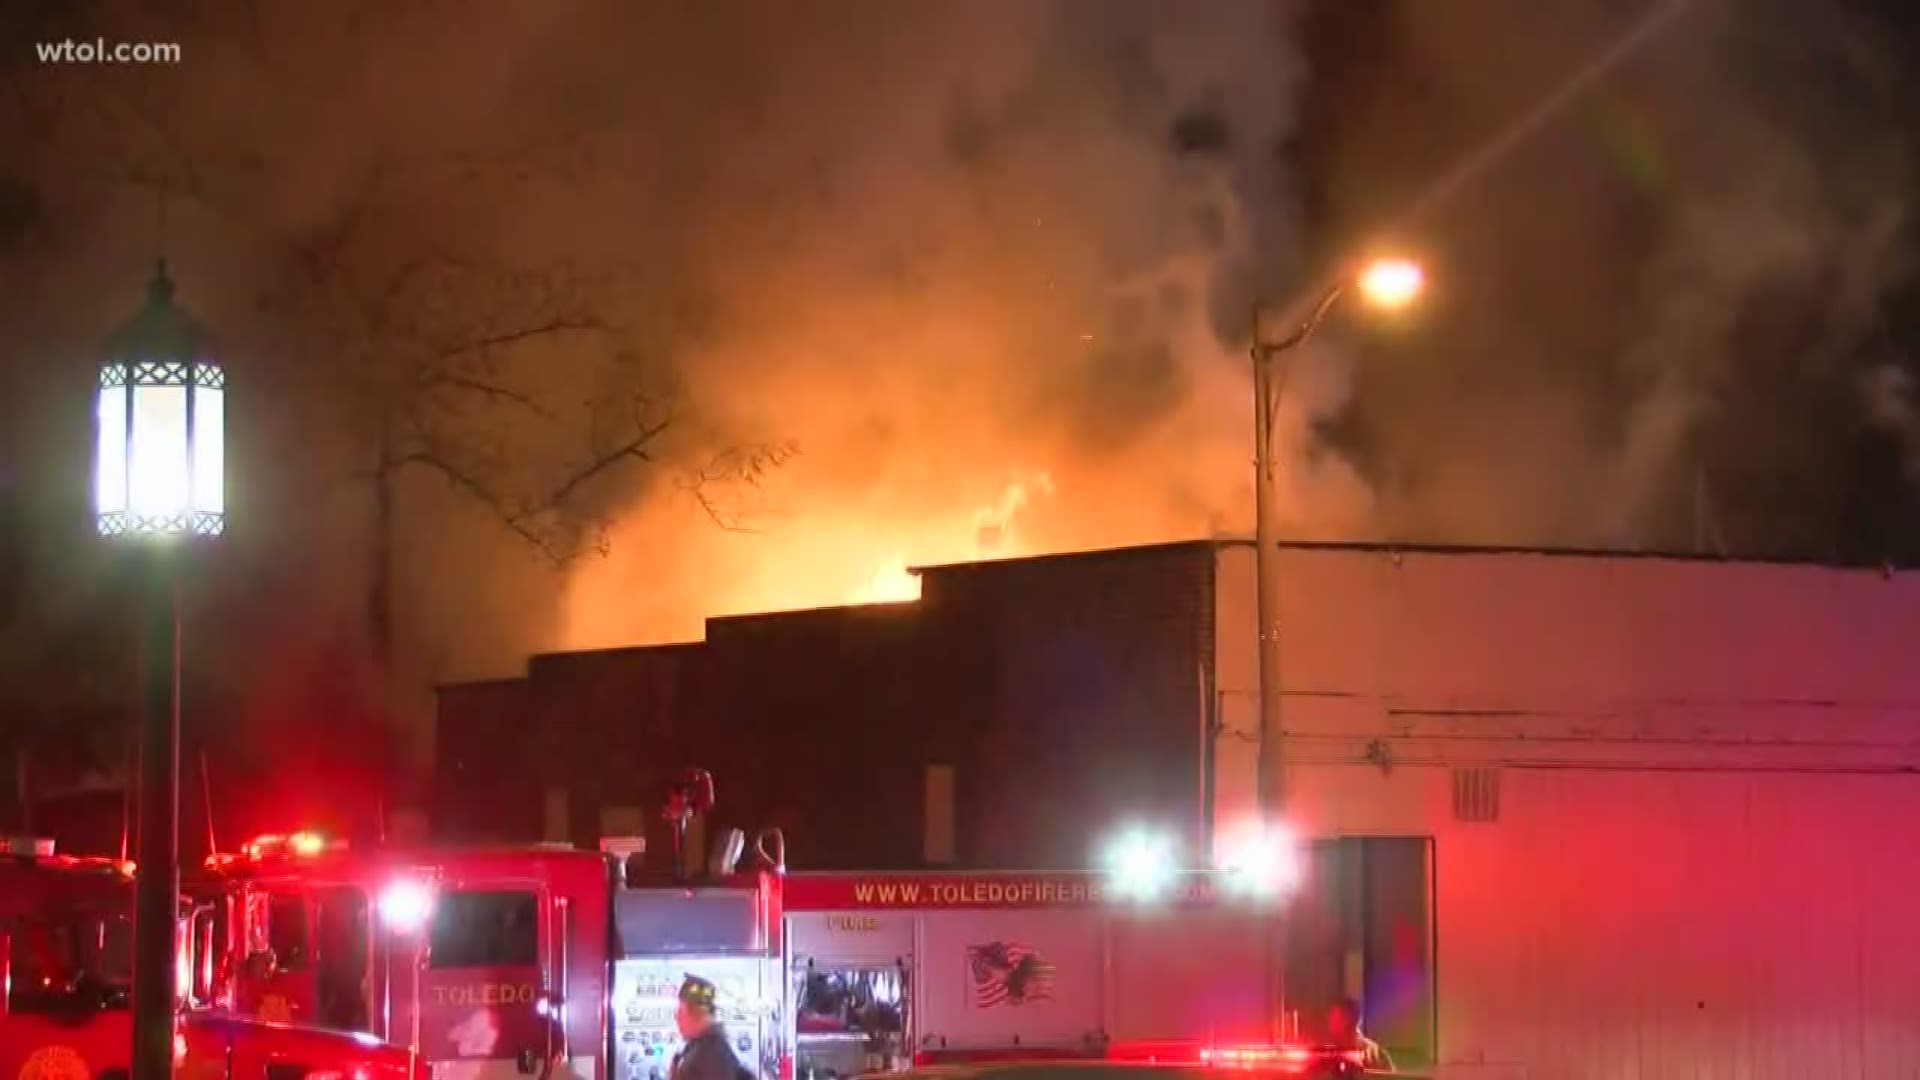 No one was inside the building when the fire broke out, fire officials say.